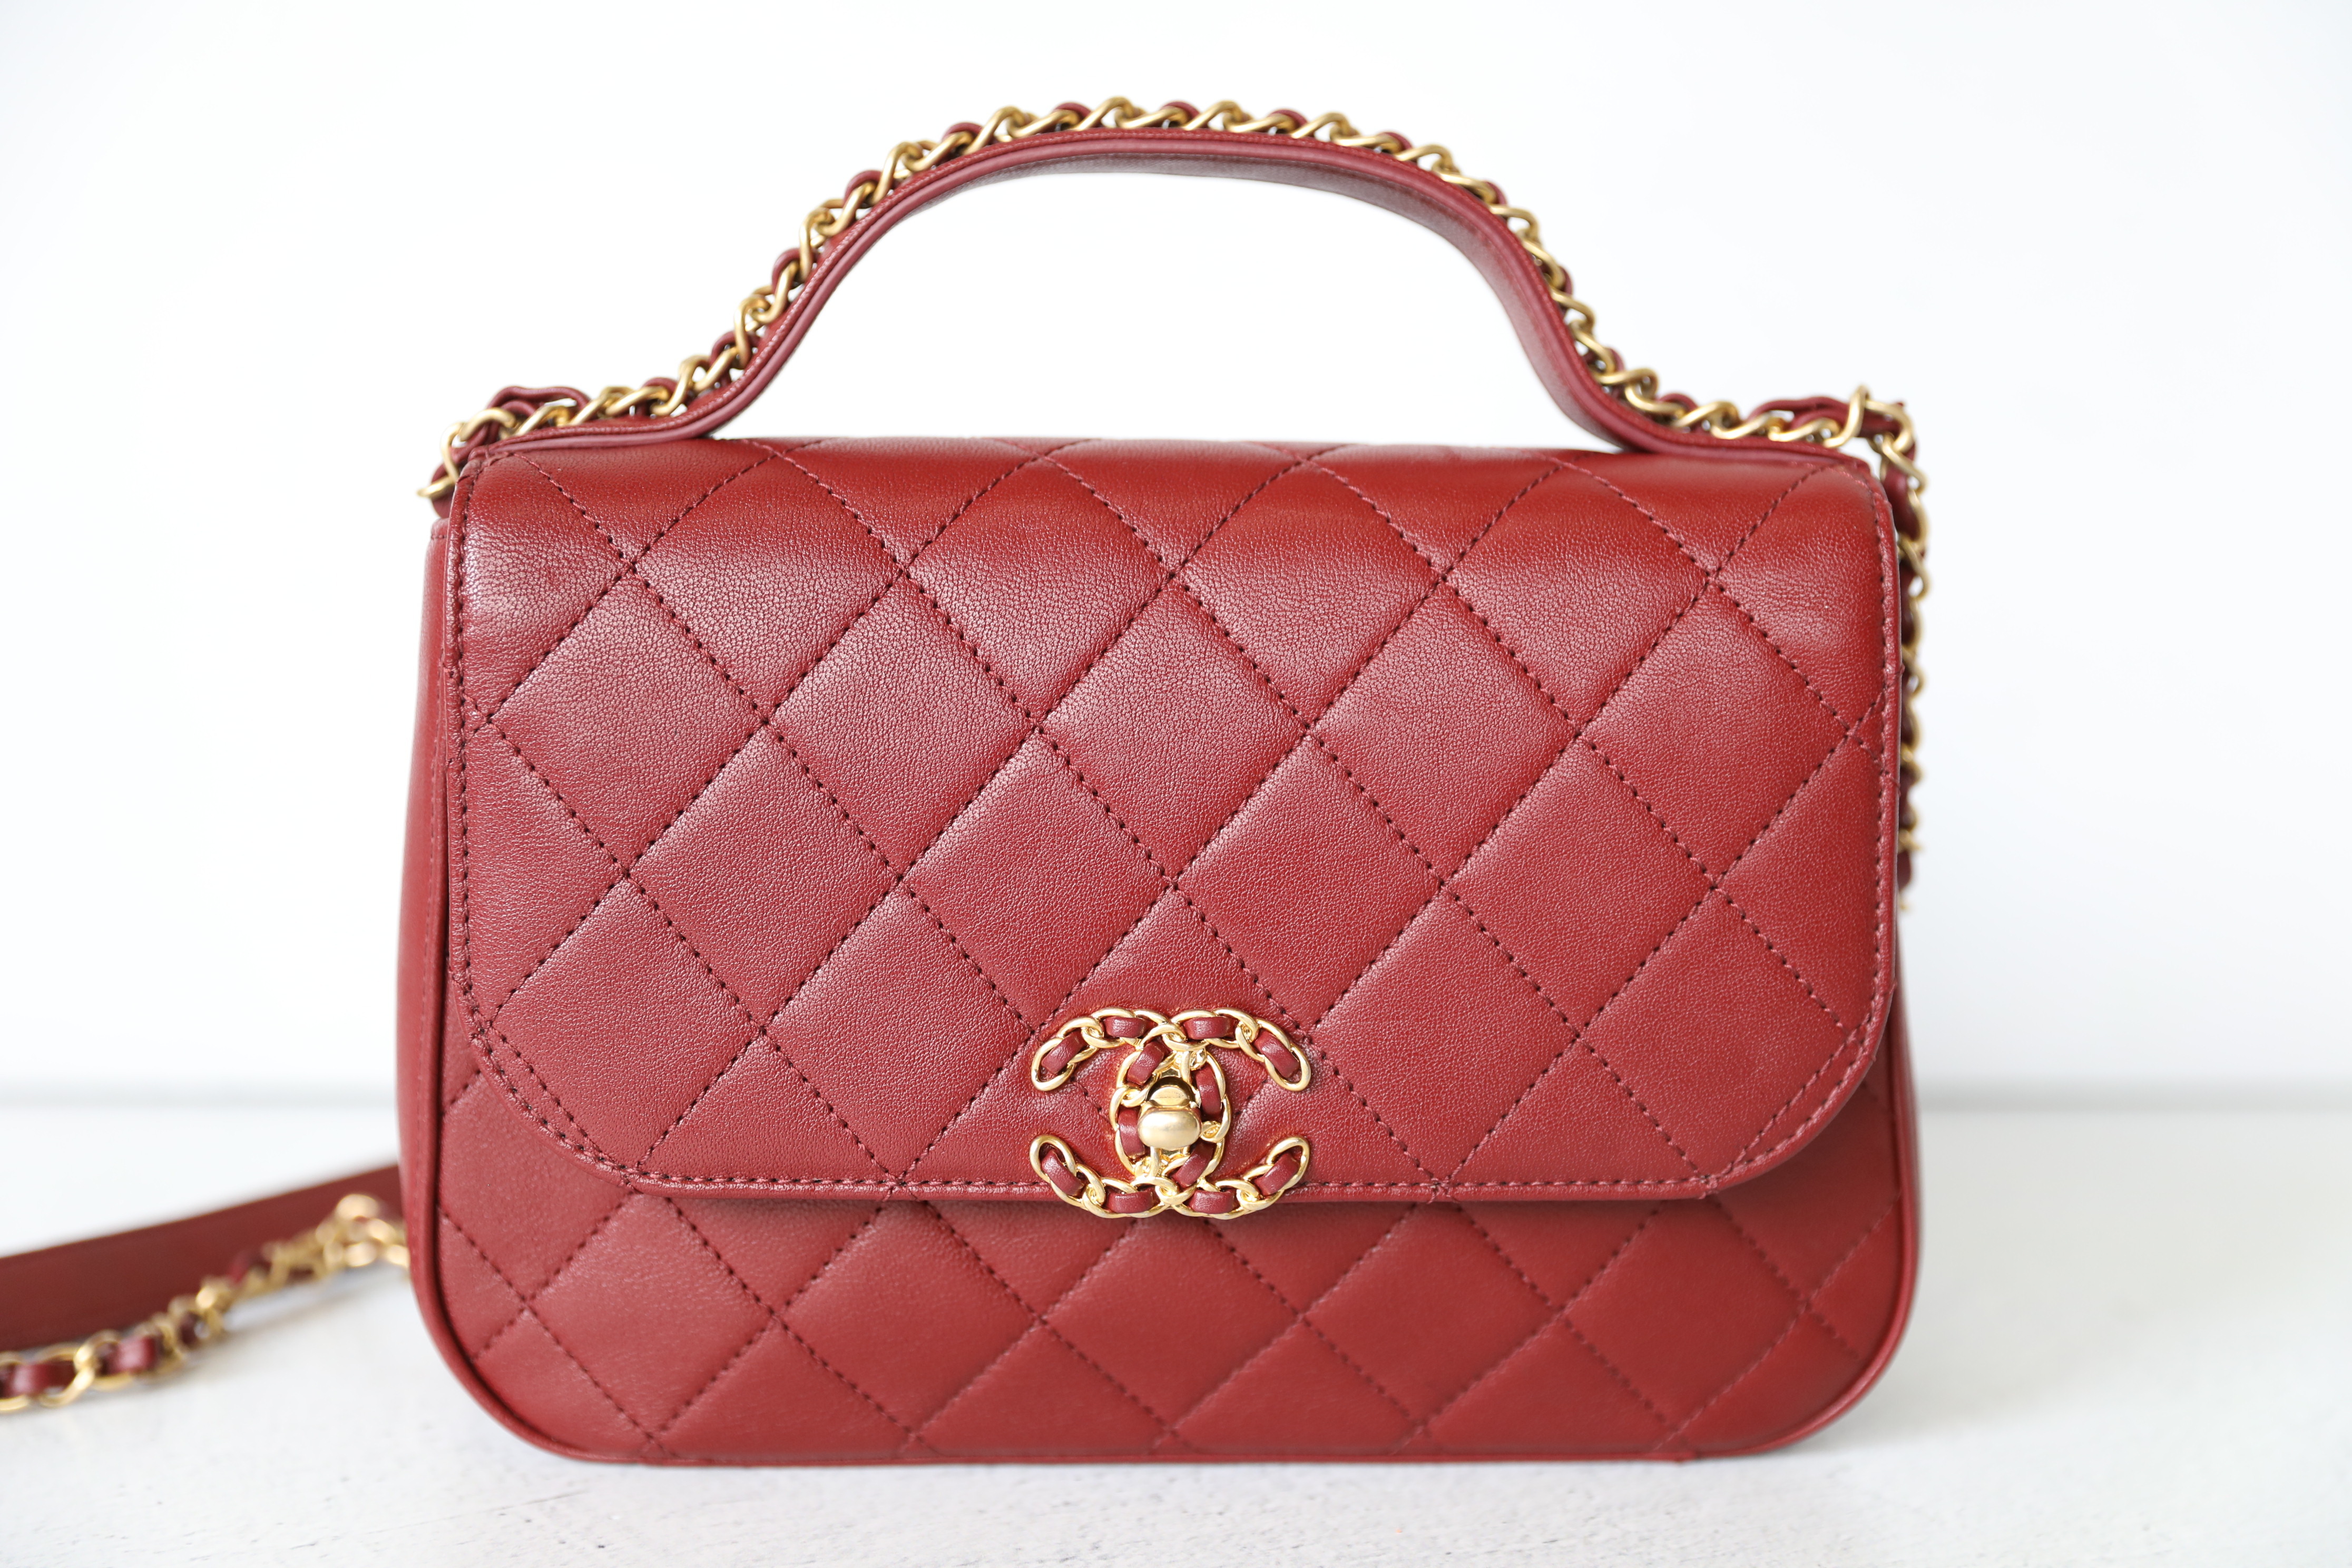 Chanel Chain Infinity Top Handle, Red with Gold Hardware, Preowned in Box  WA001 - Julia Rose Boston